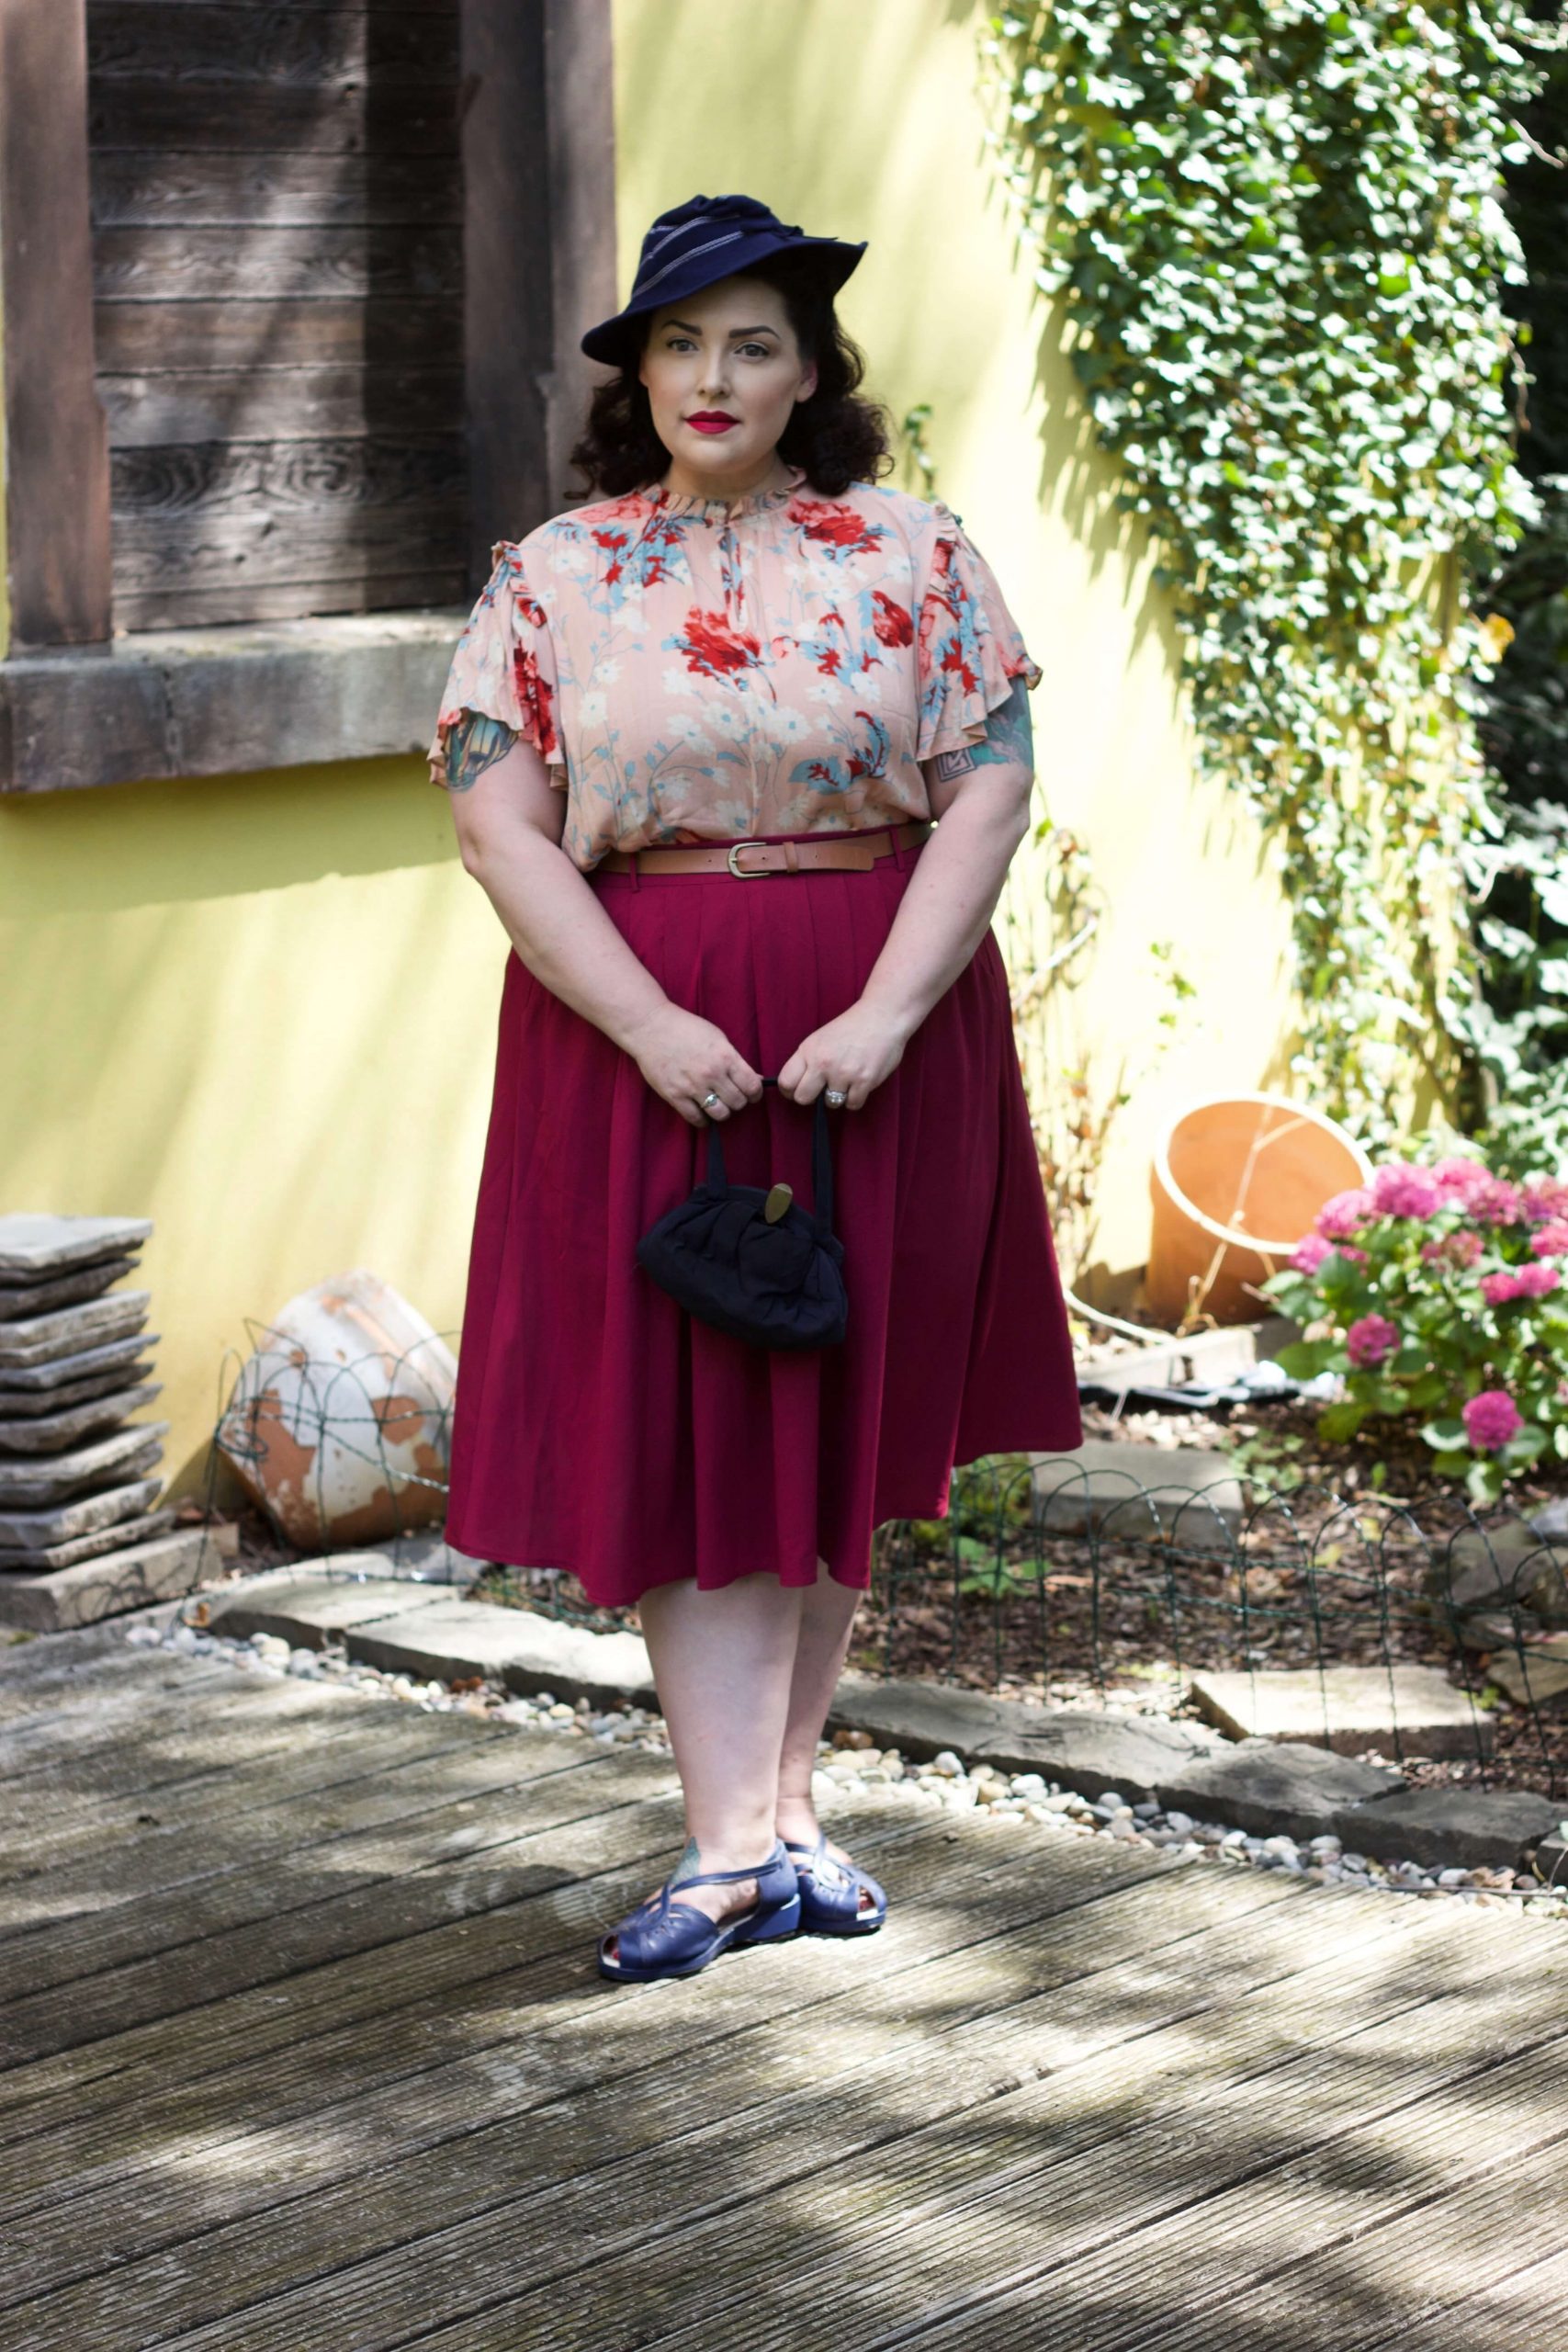 Achieving Authentic Styling with Reproduction Garments – The Vintage Woman